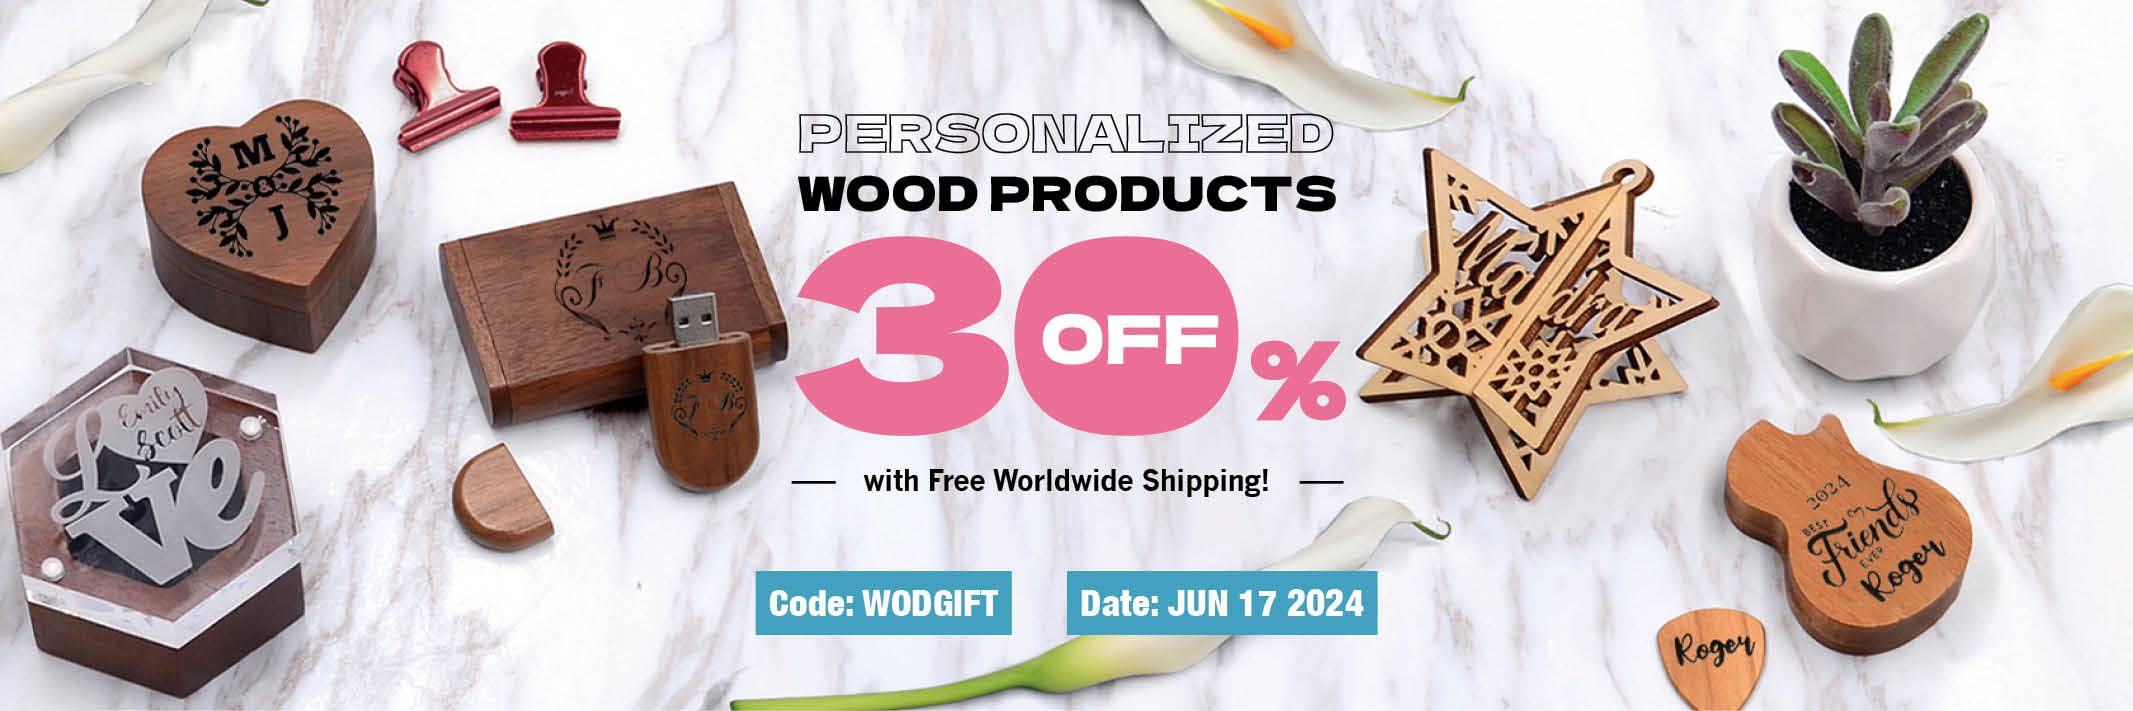 Personalized Wood Products: 30% Off with Free Worldwide Shipping!